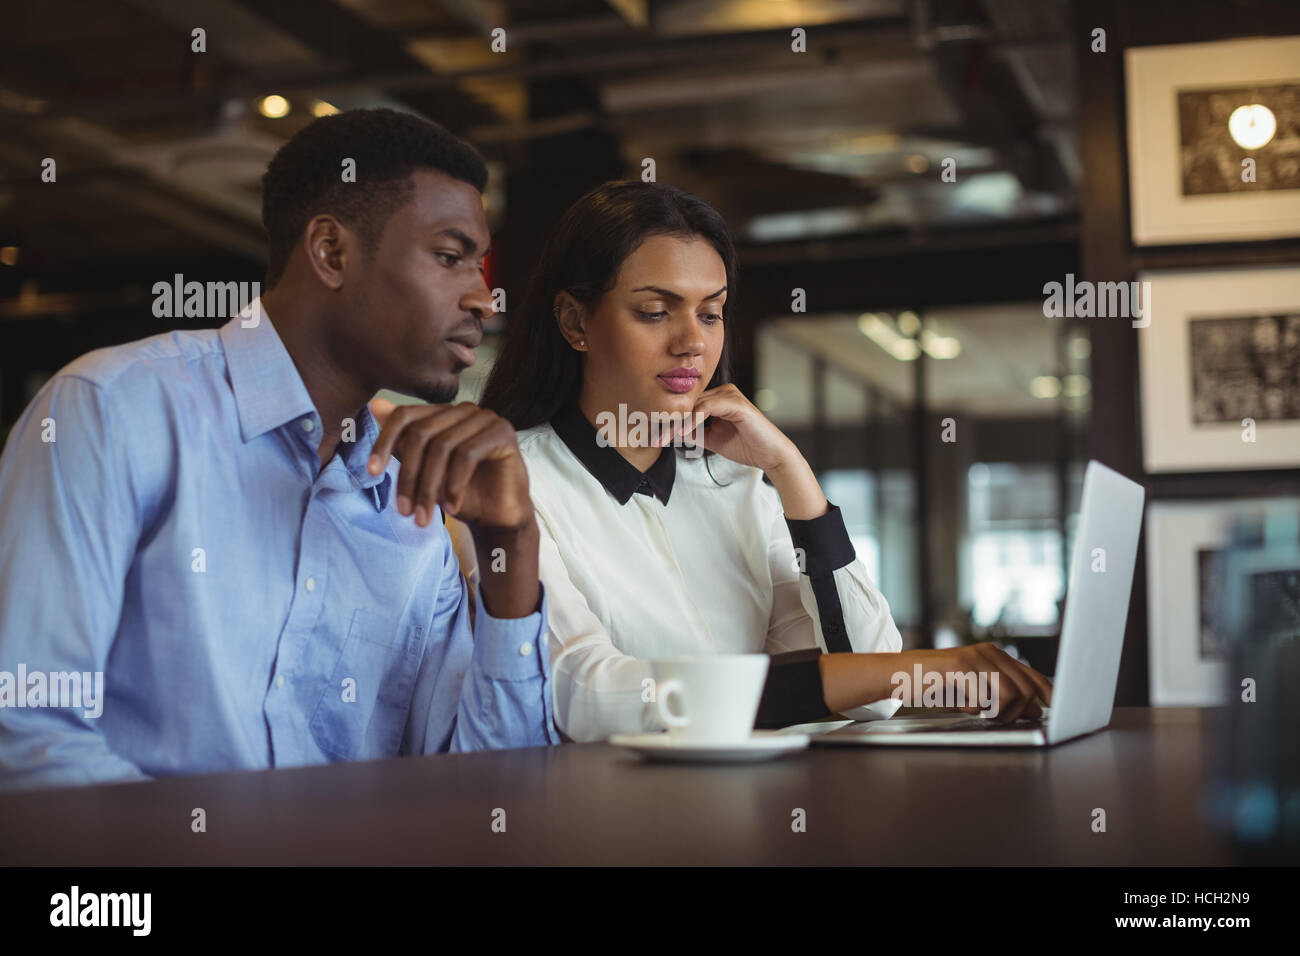 Businessman and a colleague discussing over laptop Stock Photo